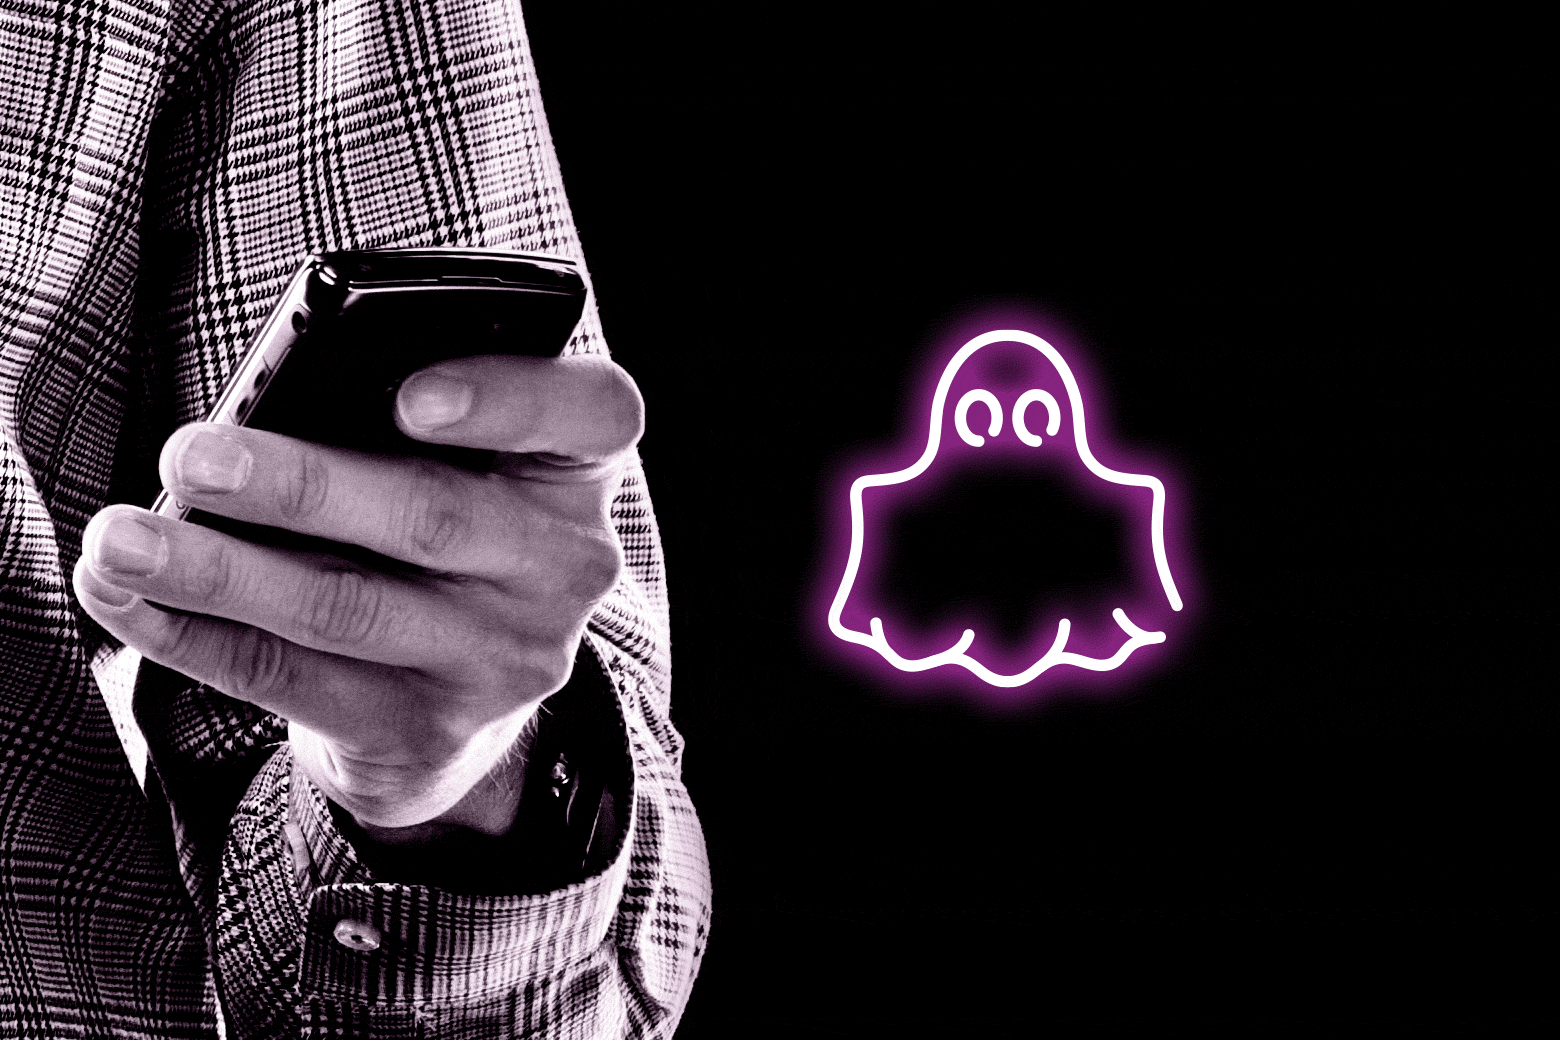 A hand holding a phone, and a graphic of a ghost.